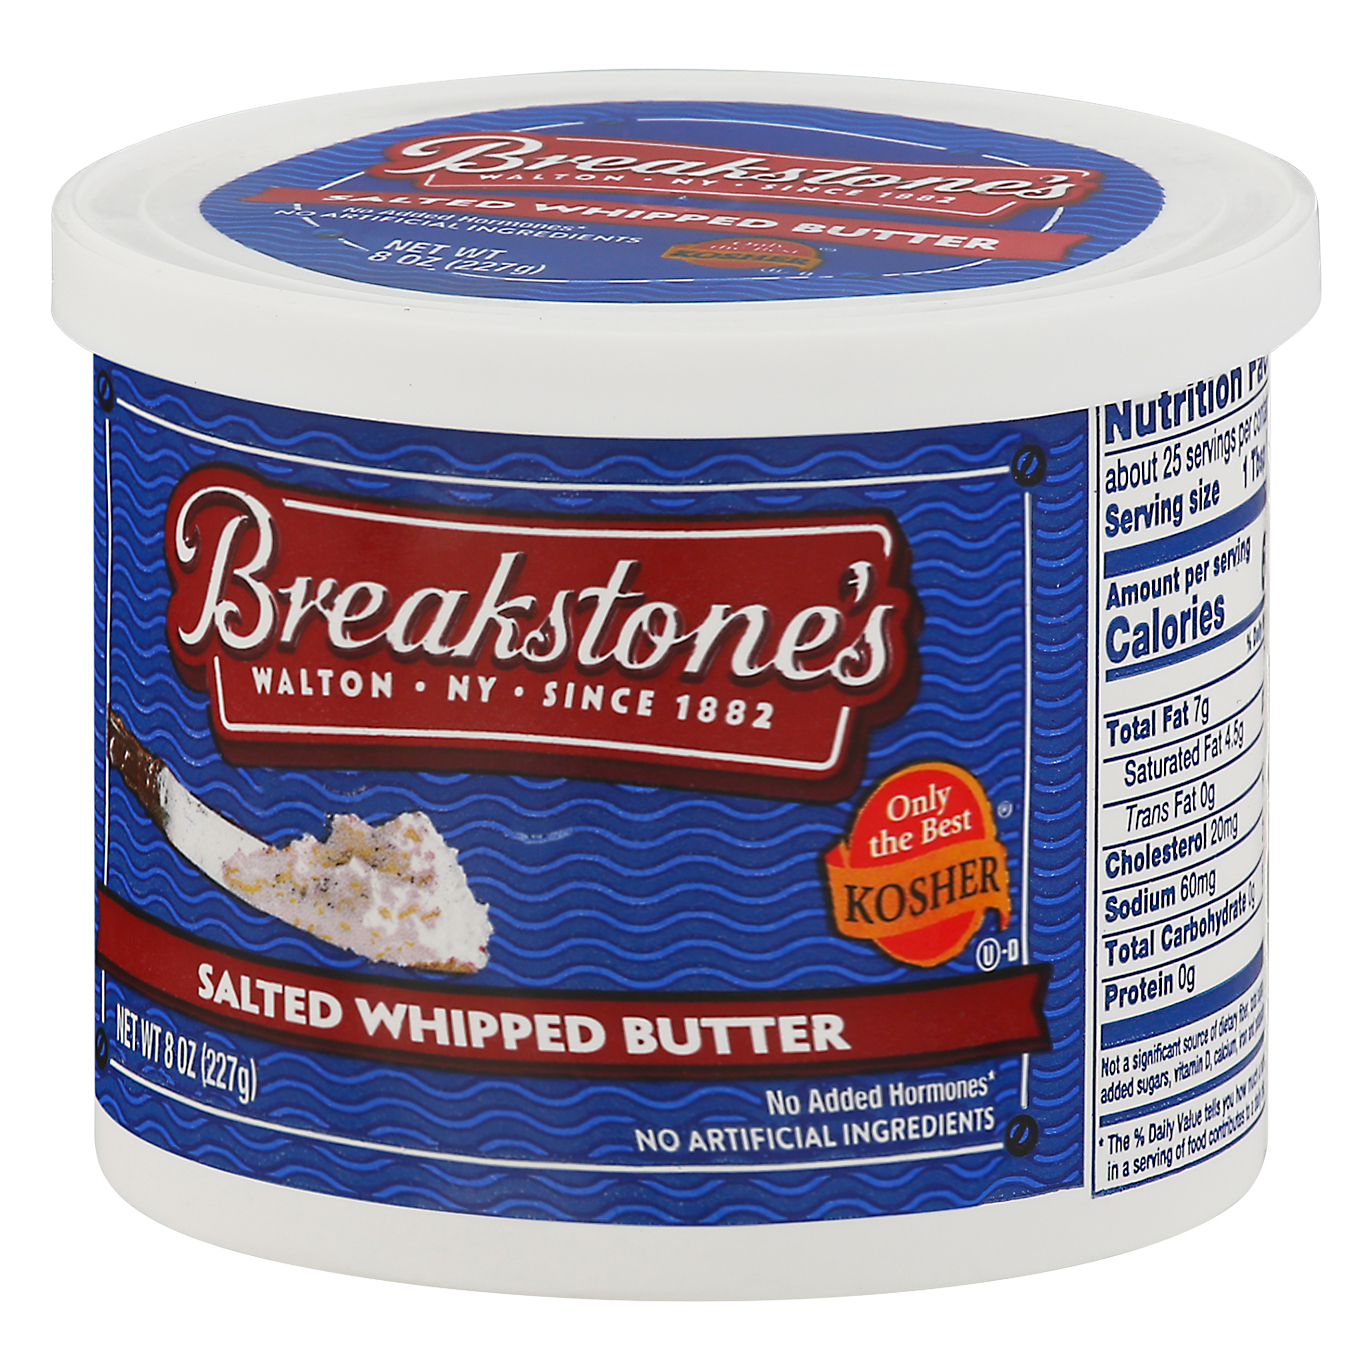 Breakstone's Kosher Salted Whipped Butter - 8 oz tub | MARTIN'S